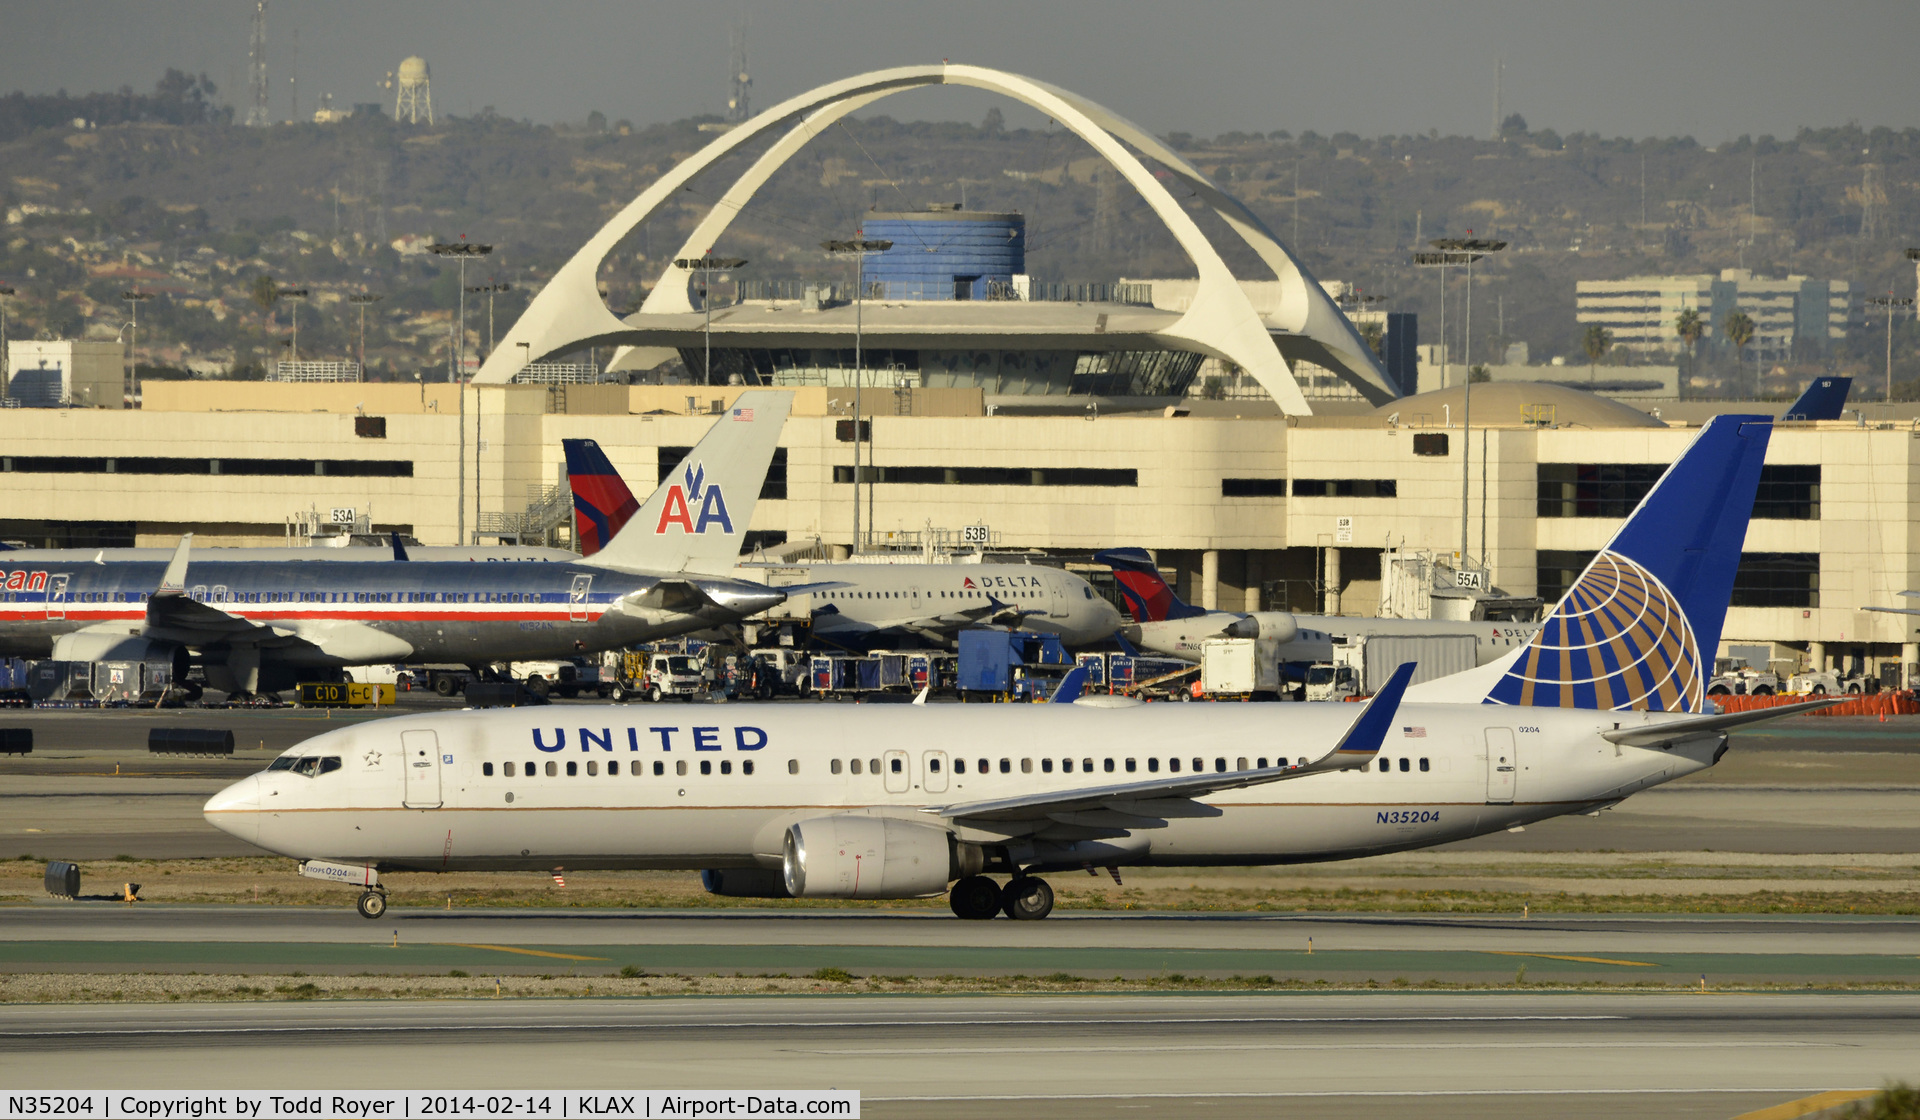 N35204, 2000 Boeing 737-824 C/N 30576, Taxiing to gate at LAX